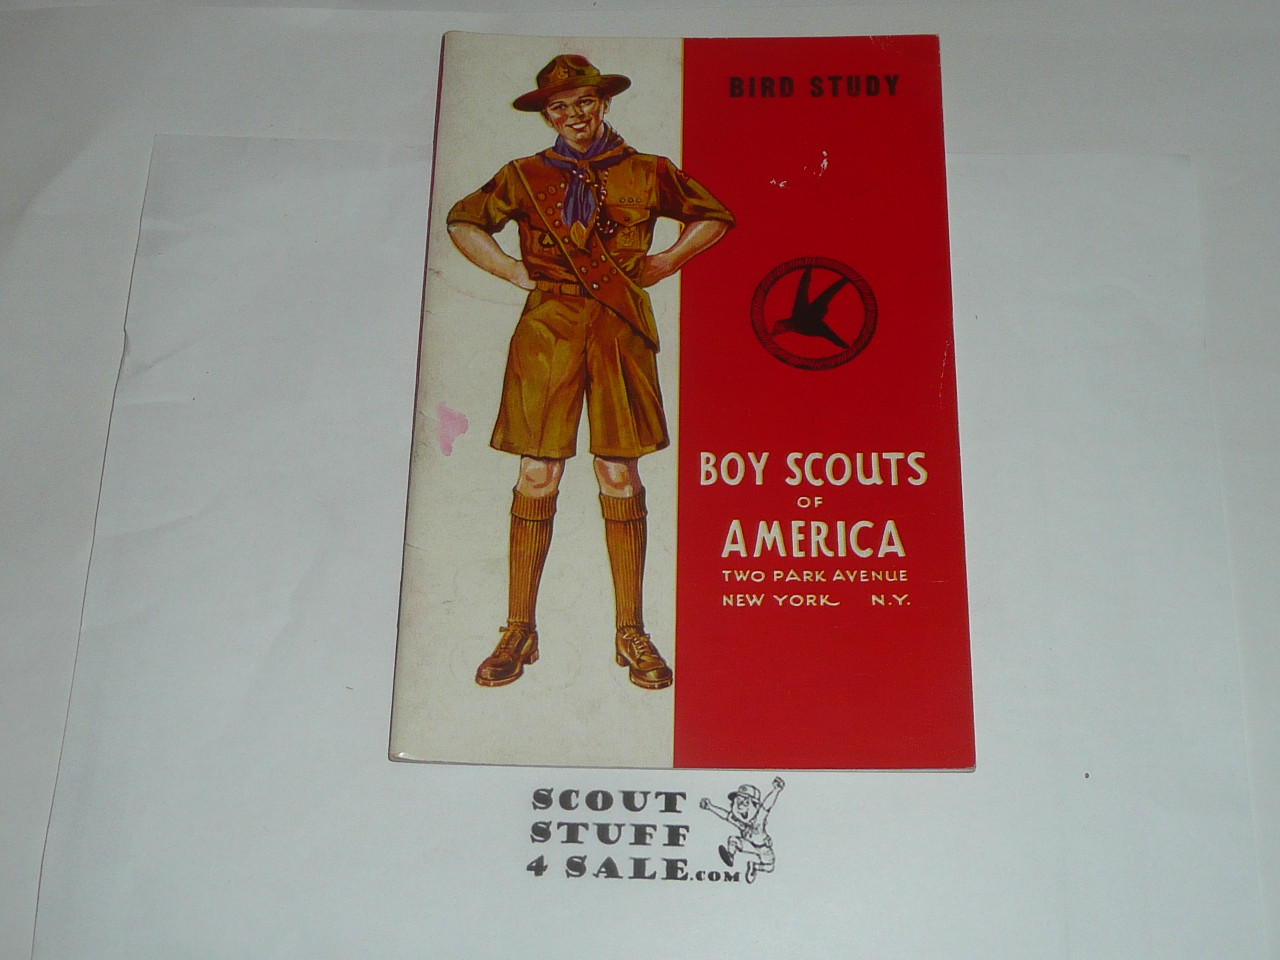 Bird Study Merit Badge Pamphlet, Type 4, Standing Scout Cover, 12-40 Printing